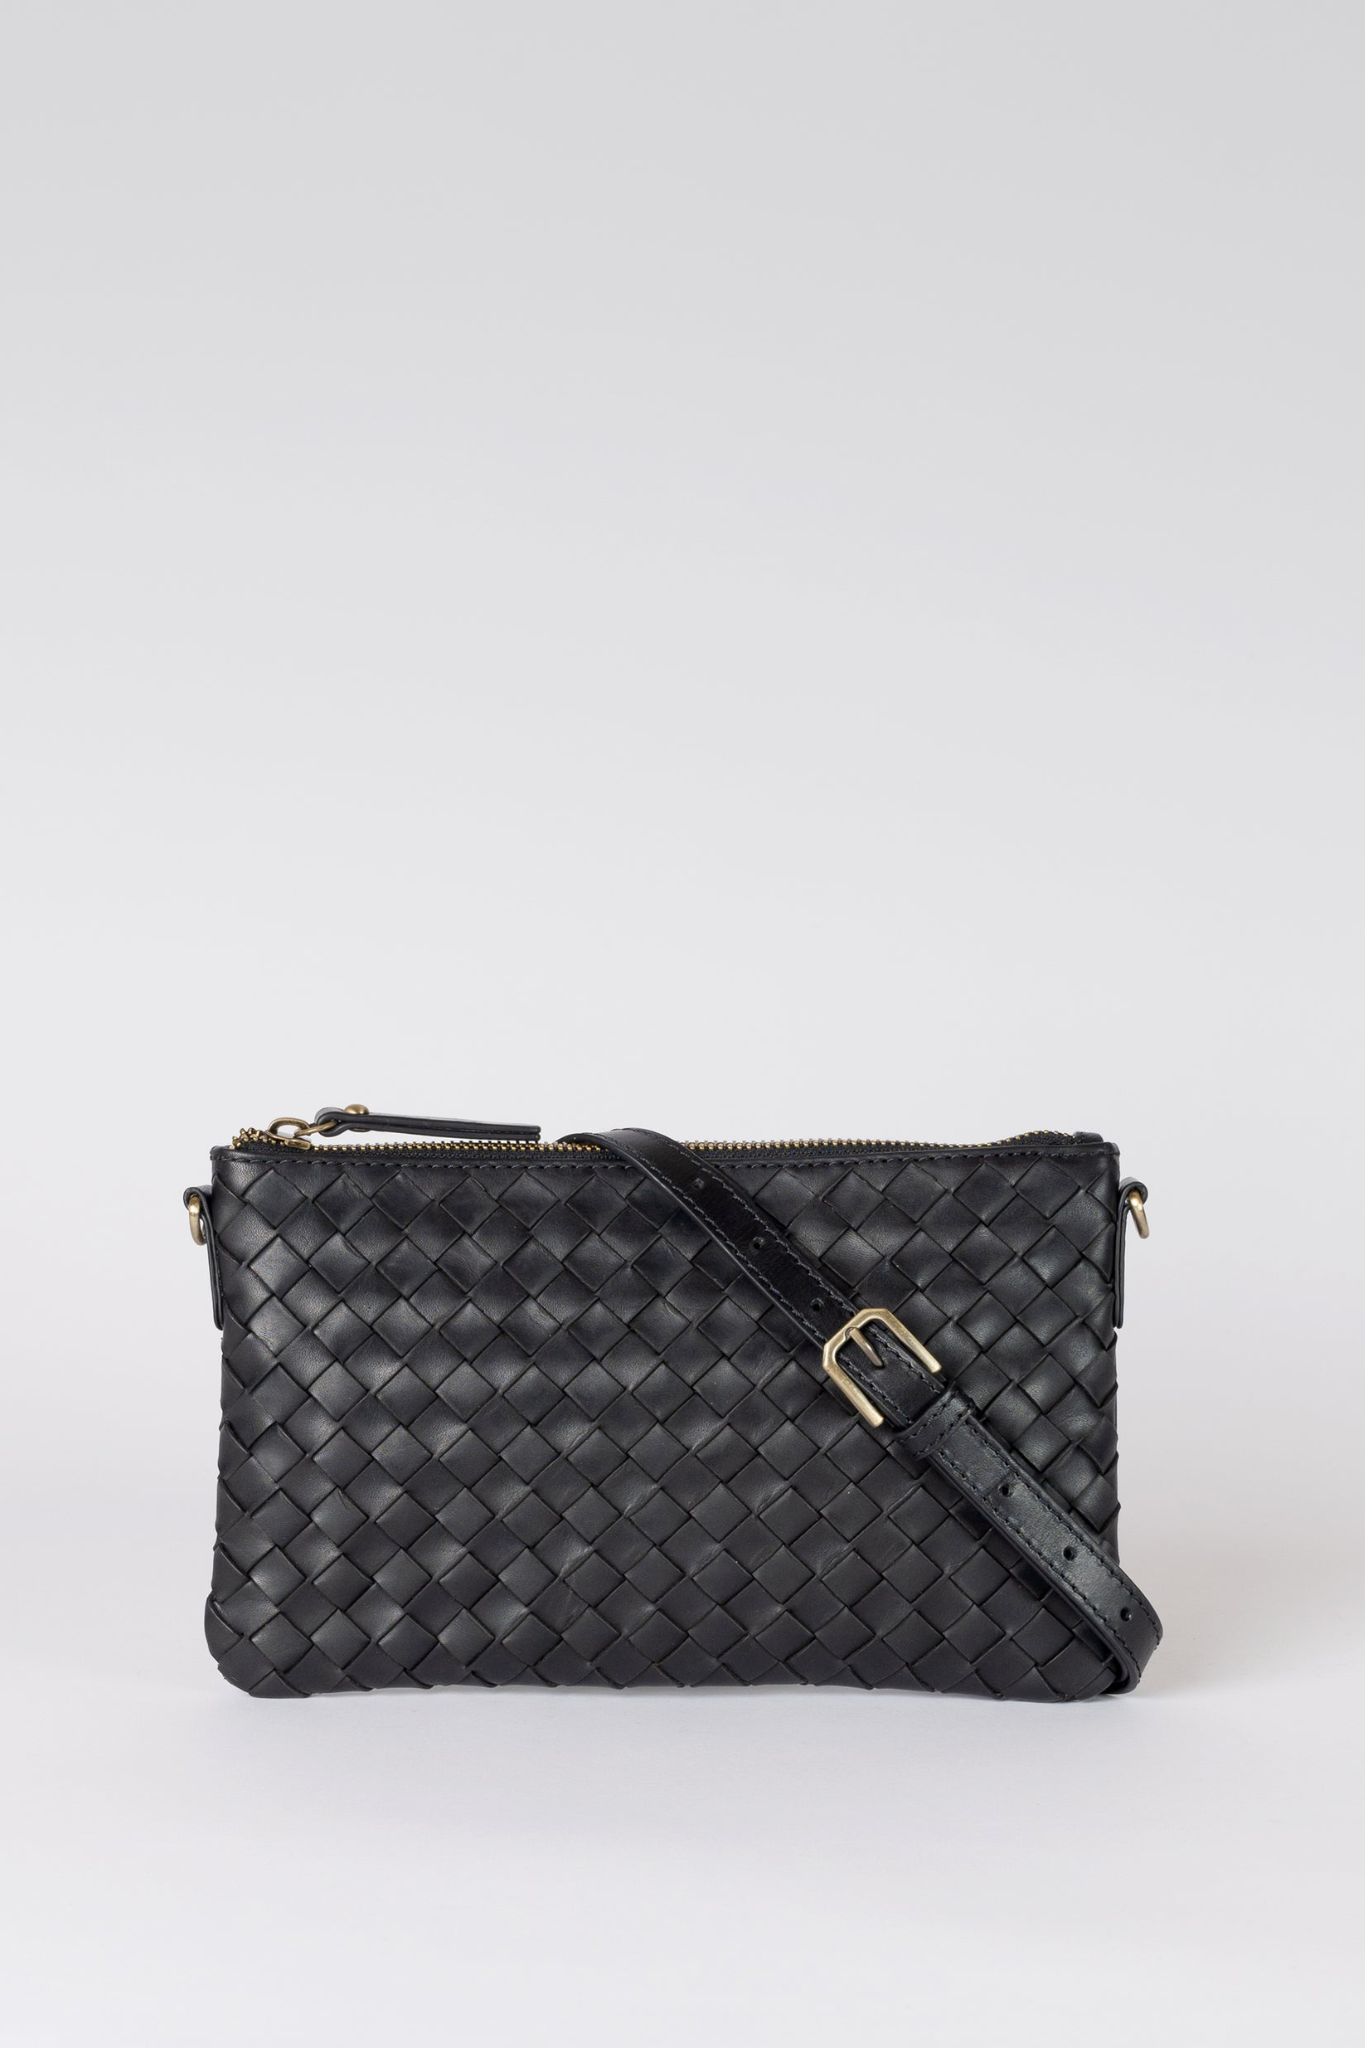 LEXI - BLACK WOVEN CLASSIC LEATHER